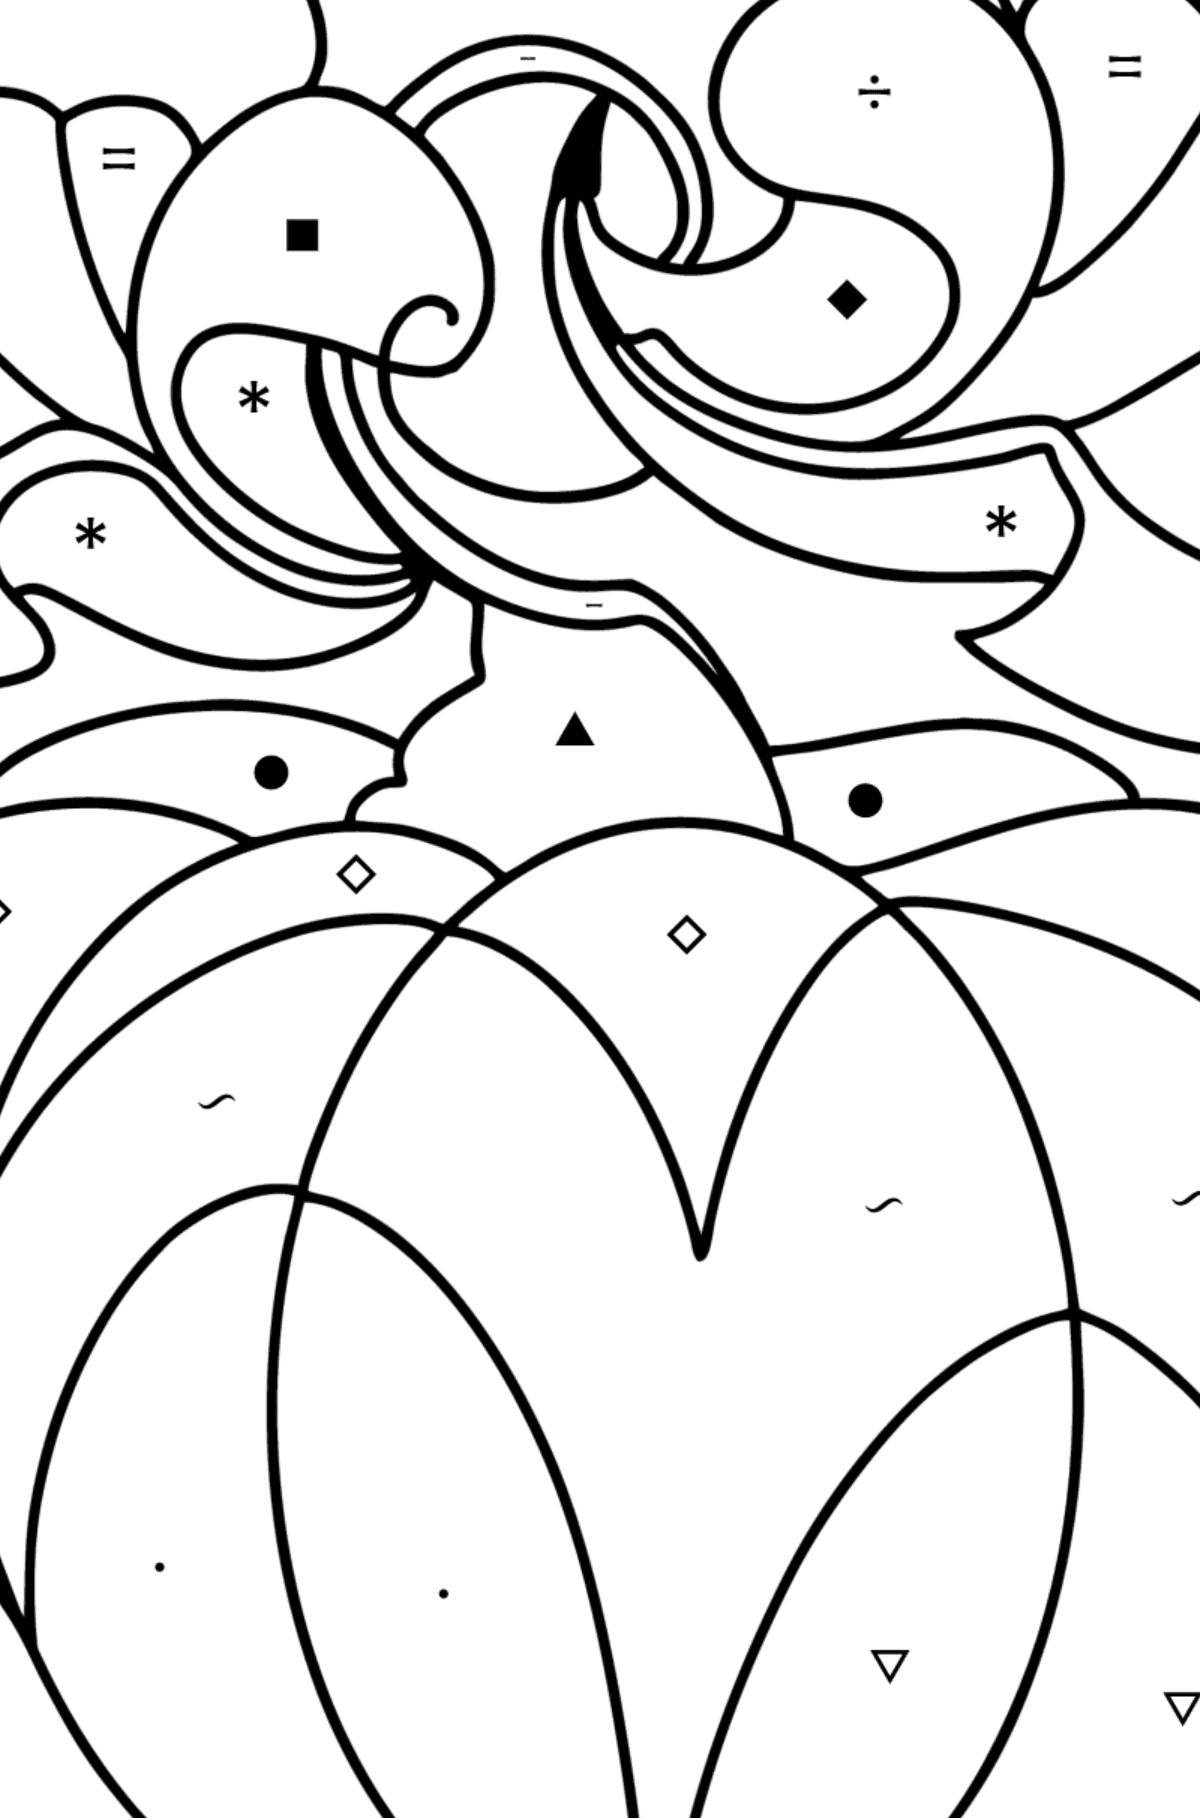 Calming Anti stress Pumpkin coloring page - Coloring by Symbols for Kids